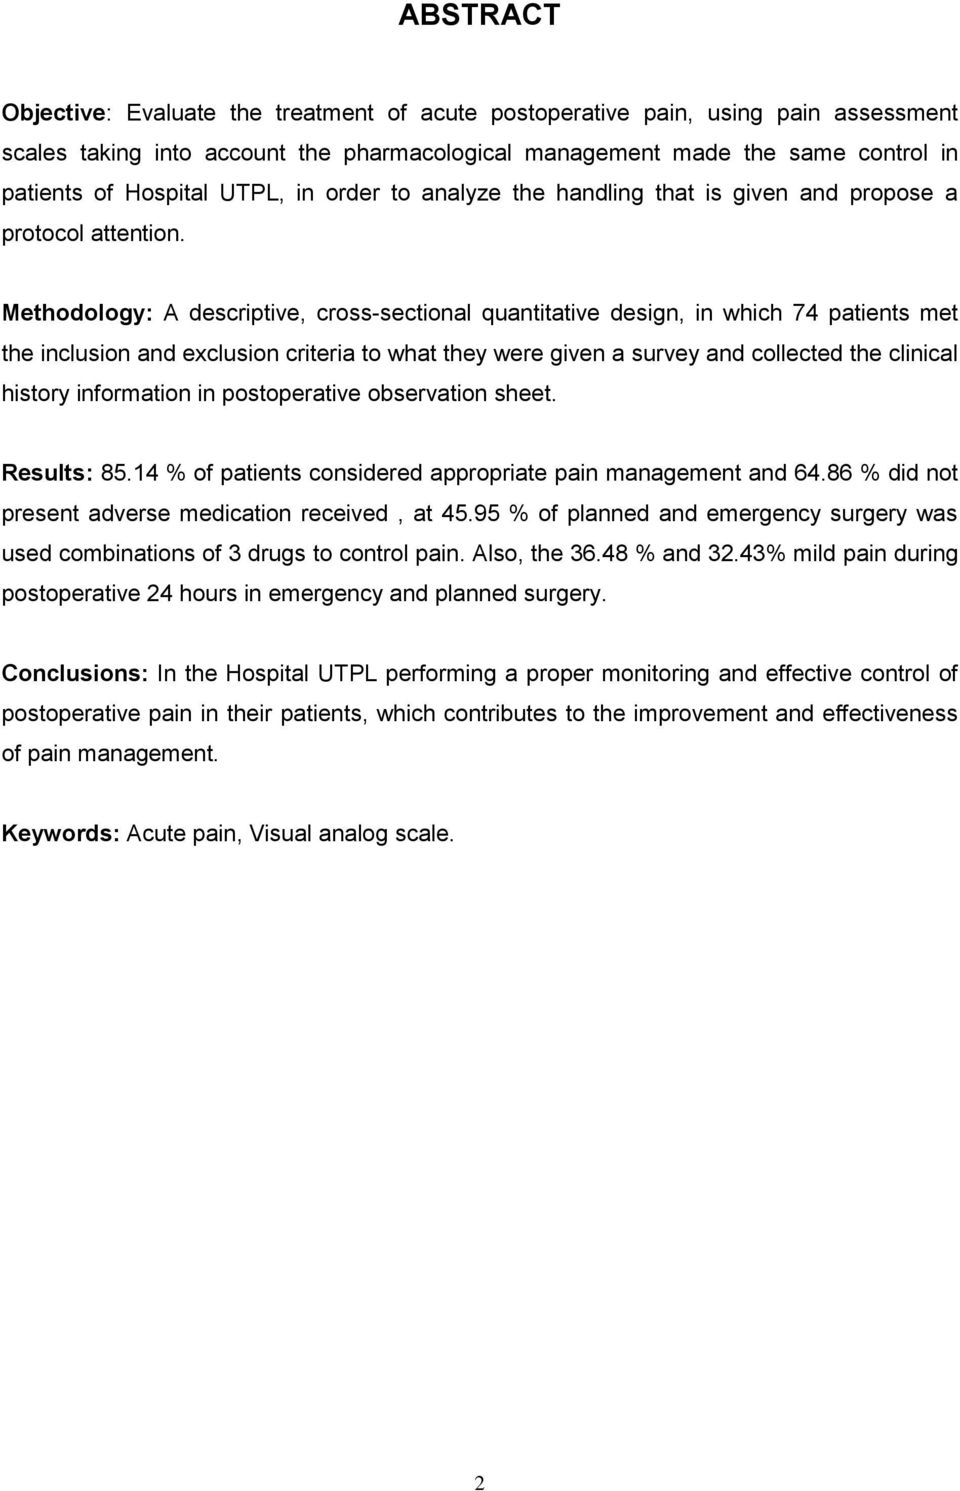 Methodology: A descriptive, cross-sectional quantitative design, in which 74 patients met the inclusion and exclusion criteria to what they were given a survey and collected the clinical history